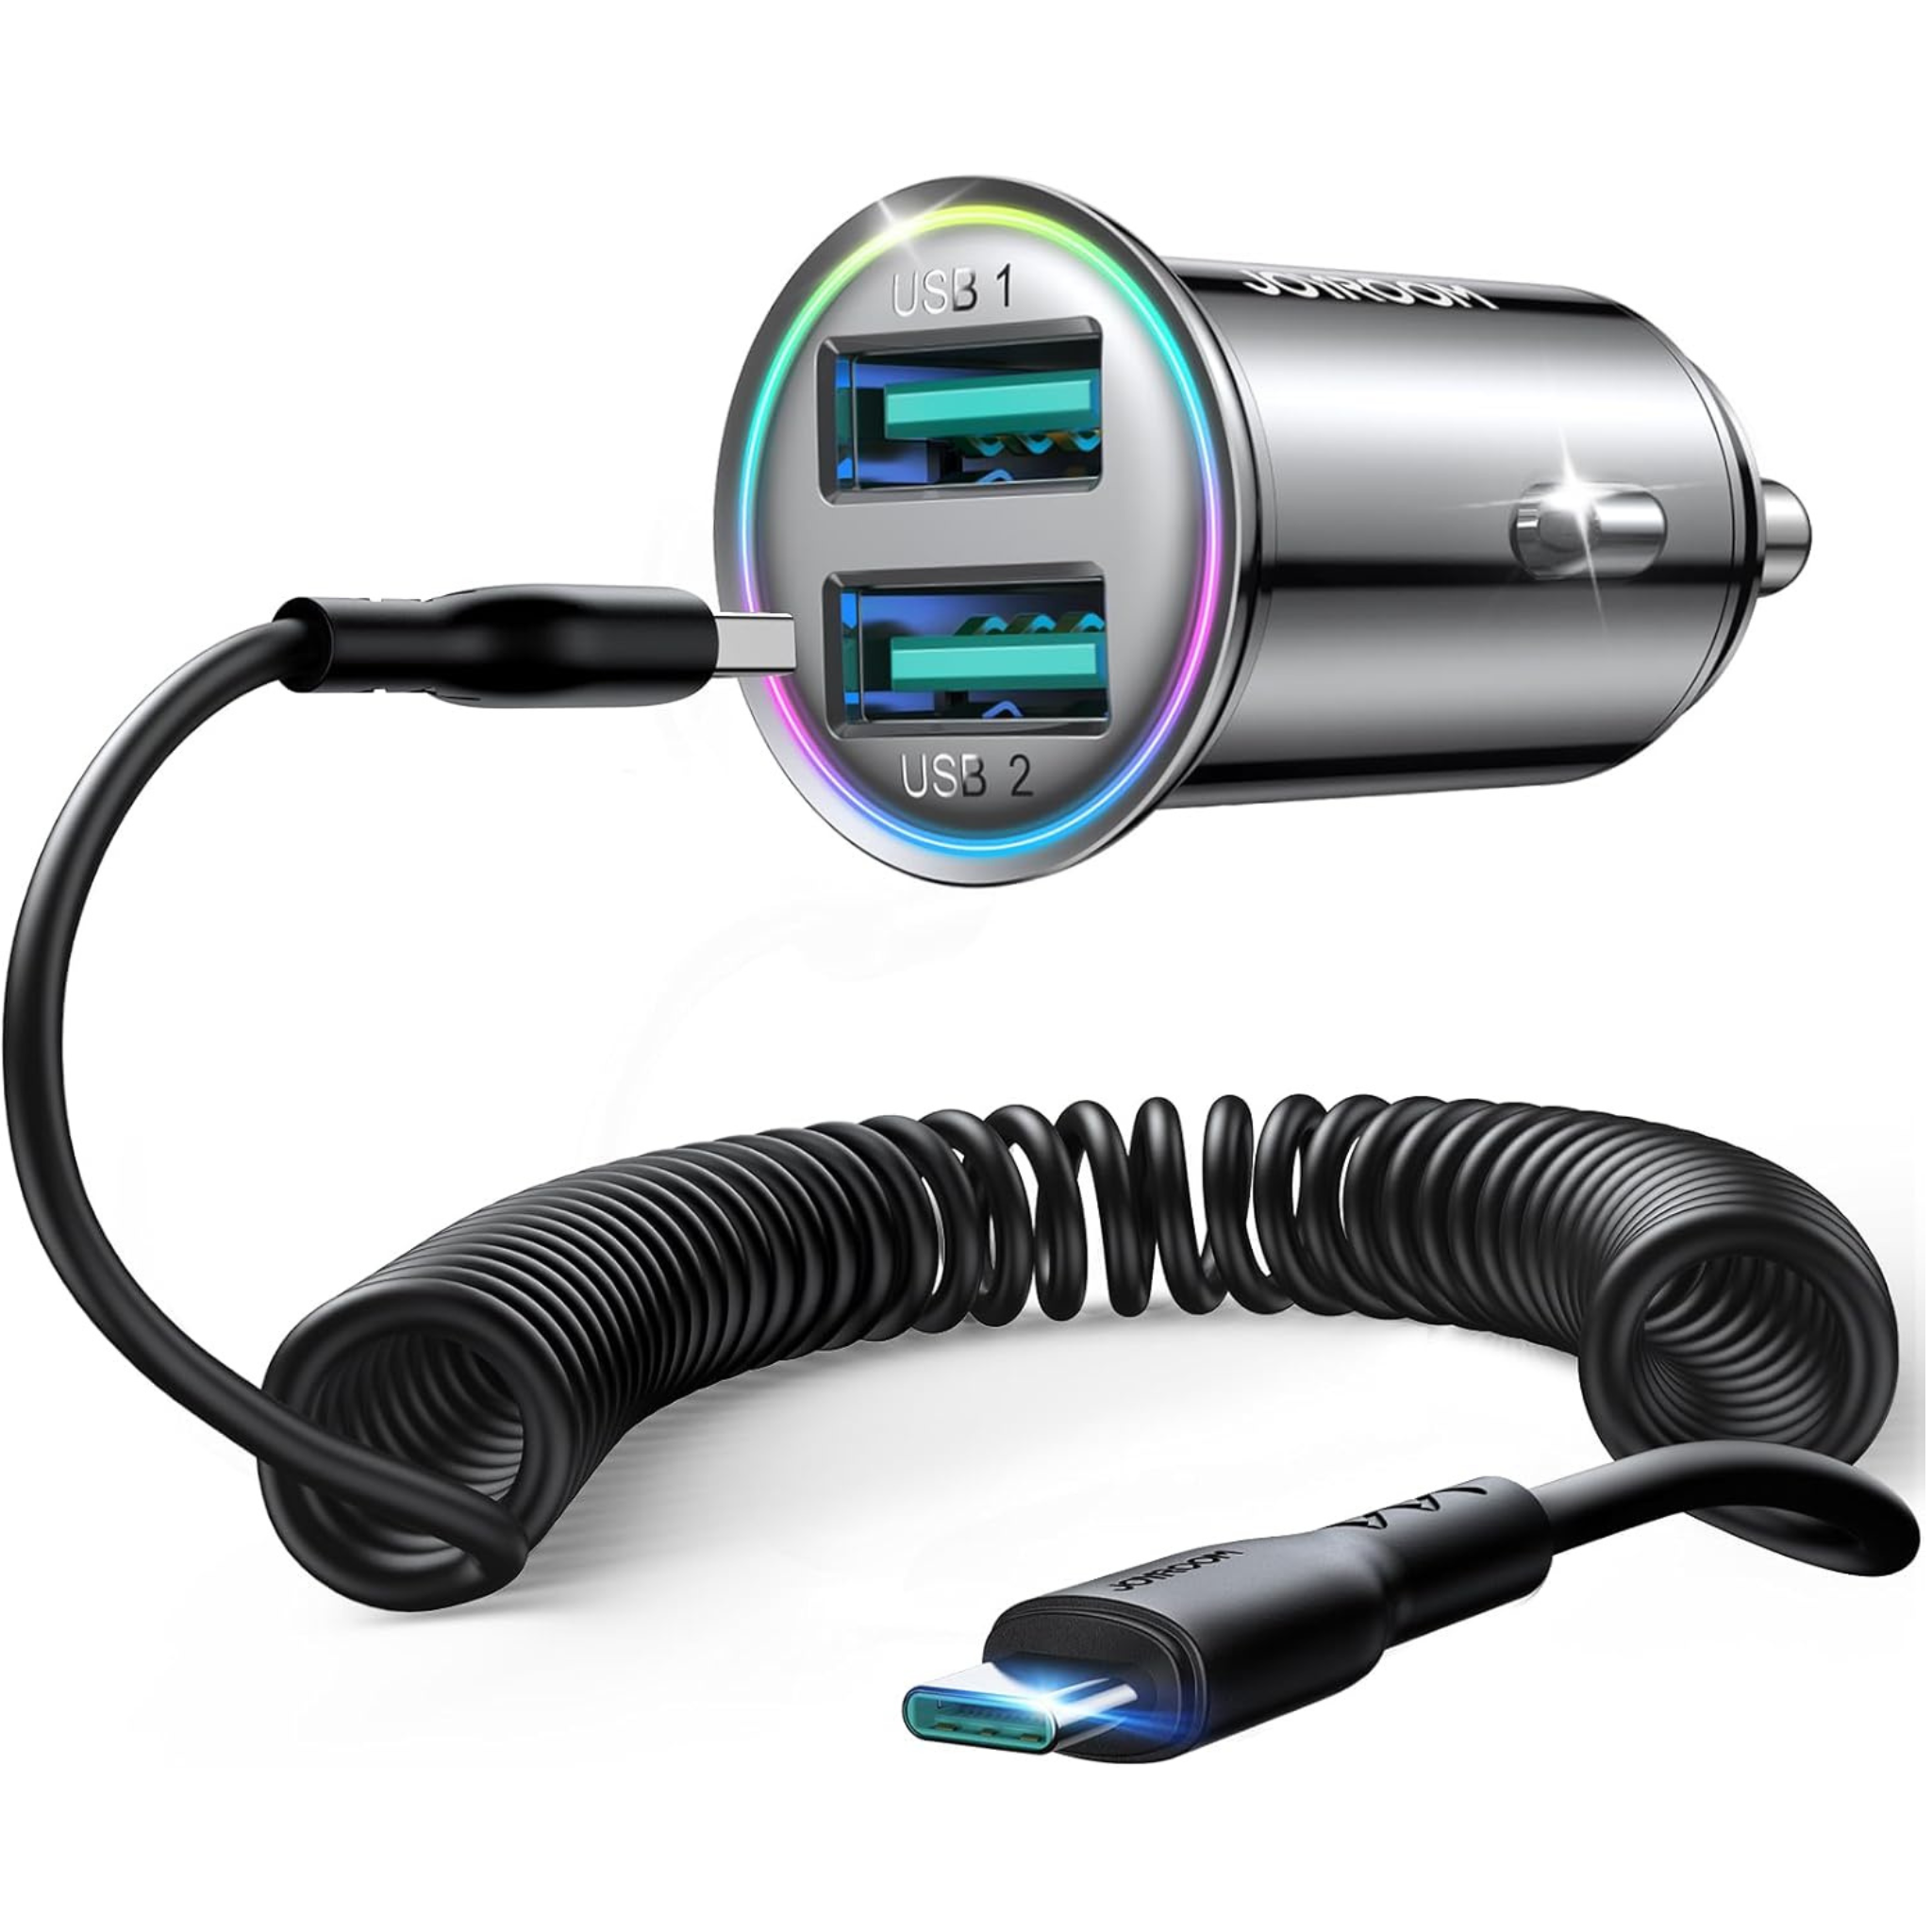 Car Phone USB Charger with Type-C Coiled Cable